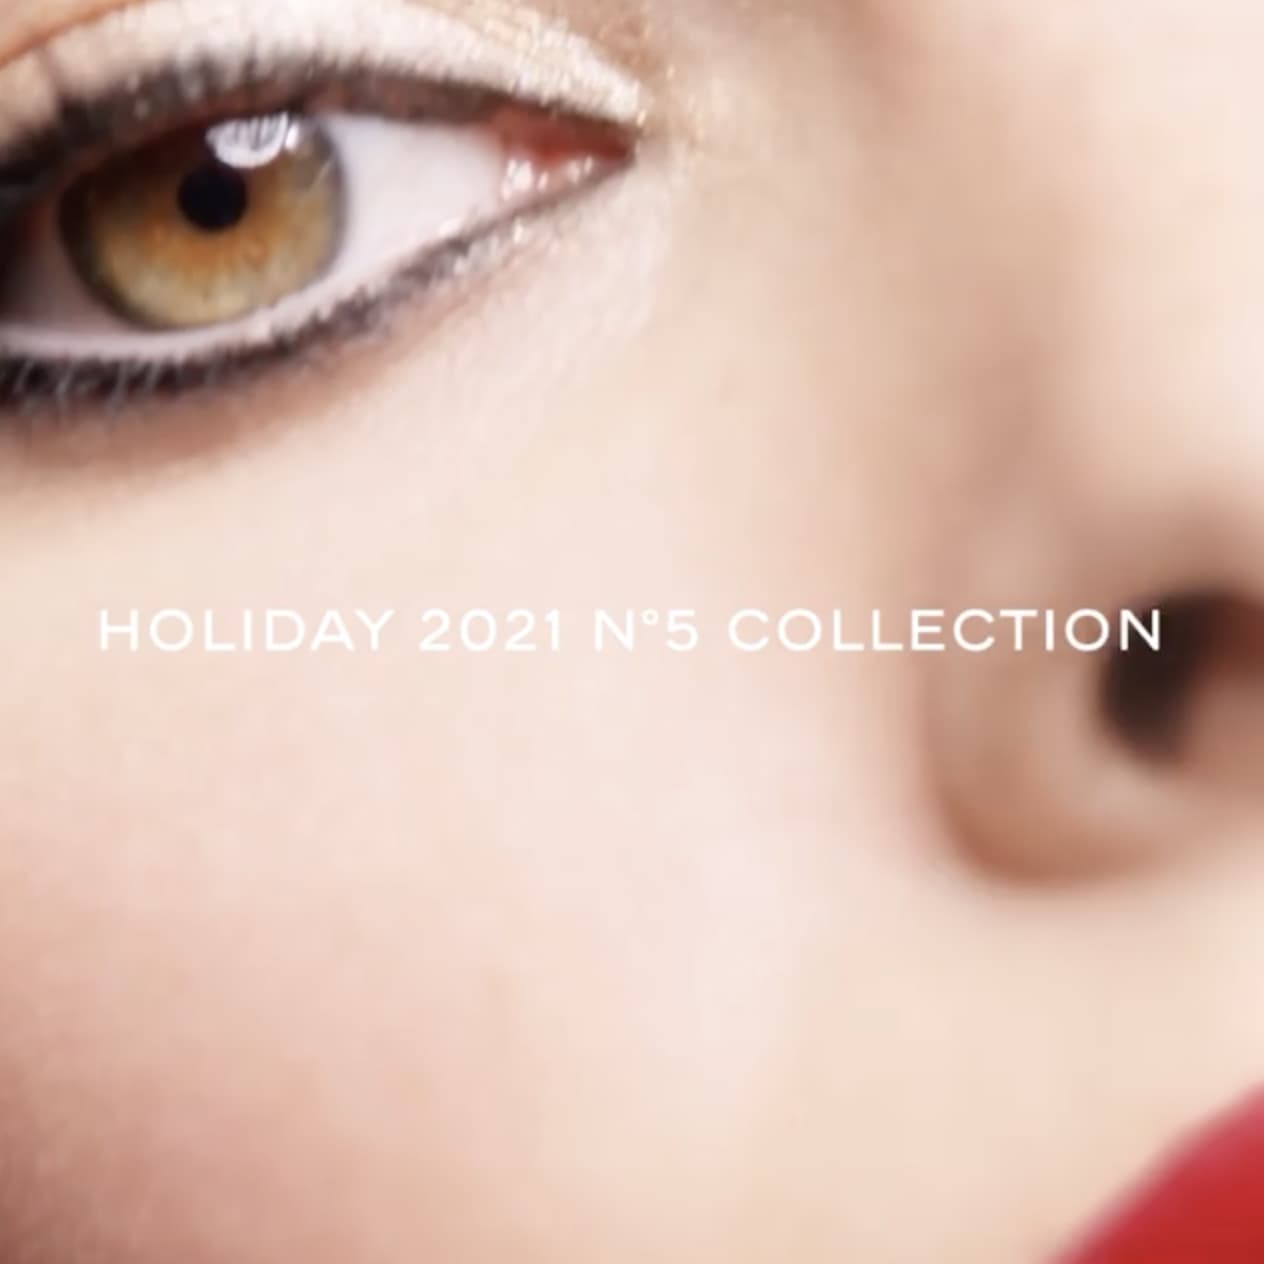 CHANEL - No. 5 Makeup Collection / Holiday 2021 